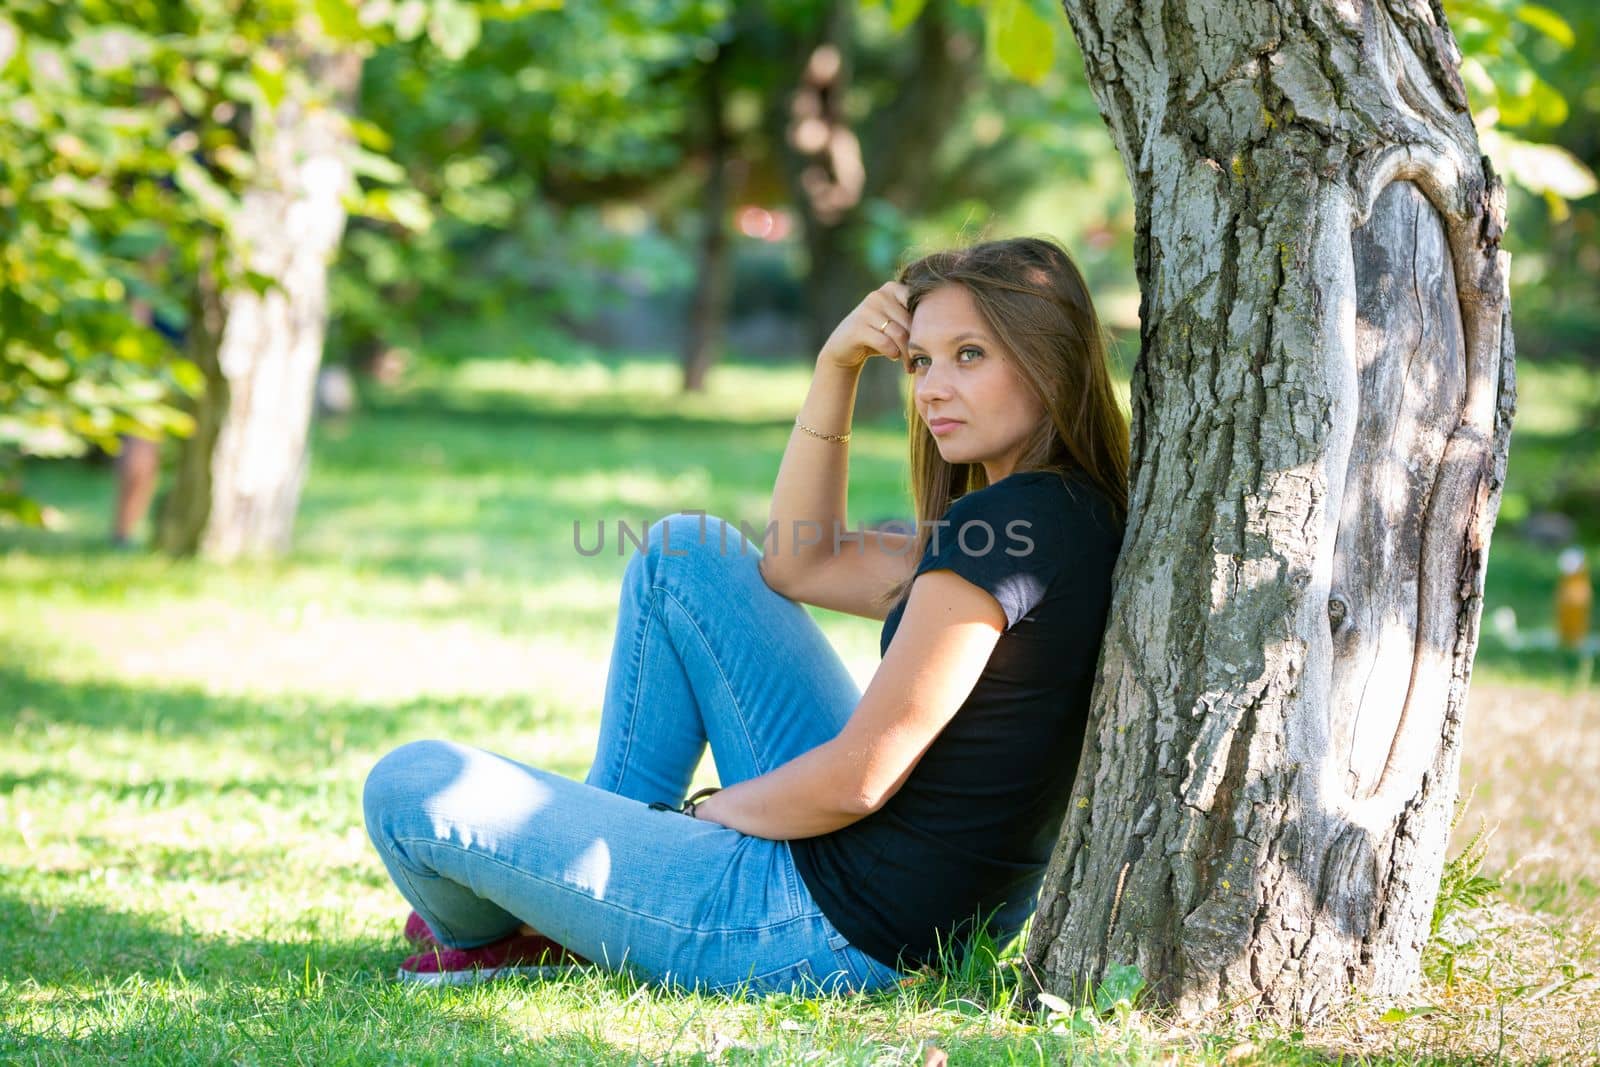 A girl sits under a tree in a sunny park and looks into the distance in thought by Madhourse